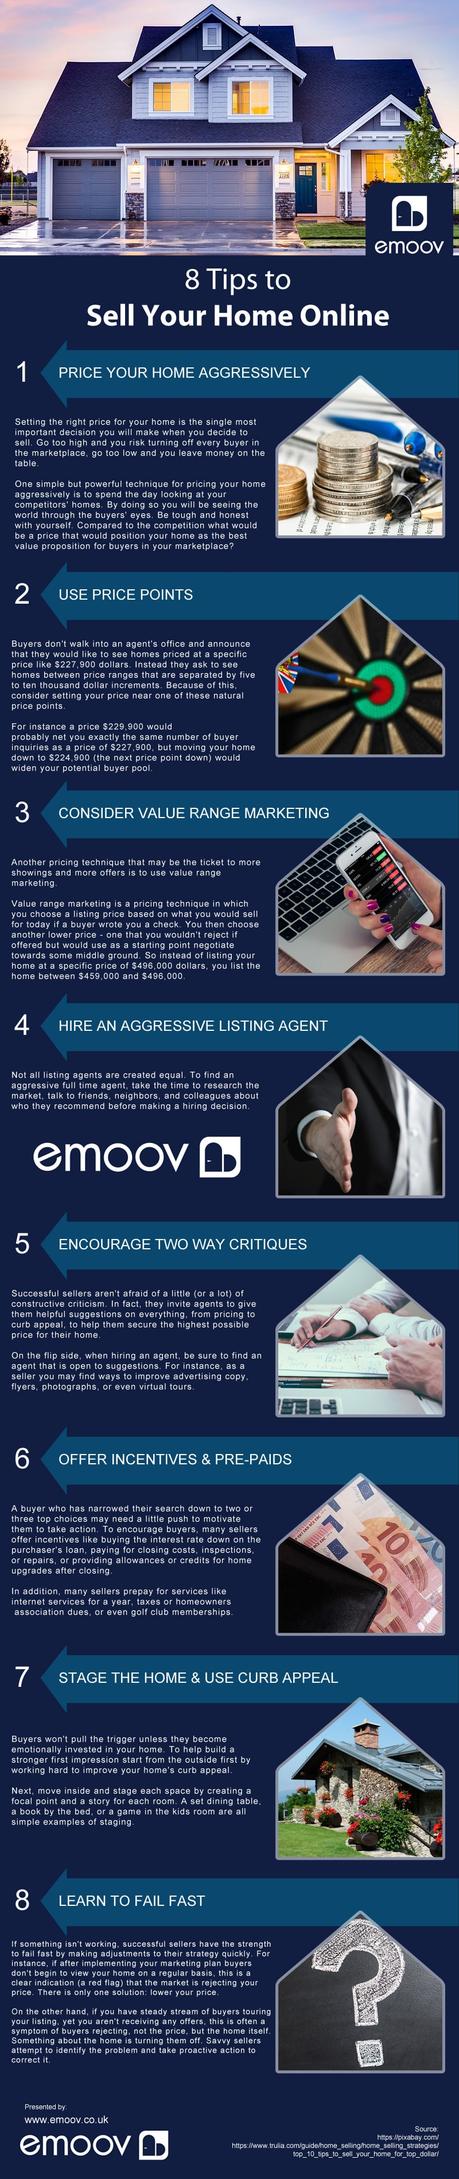 8 Tips to Sell Your Home Online